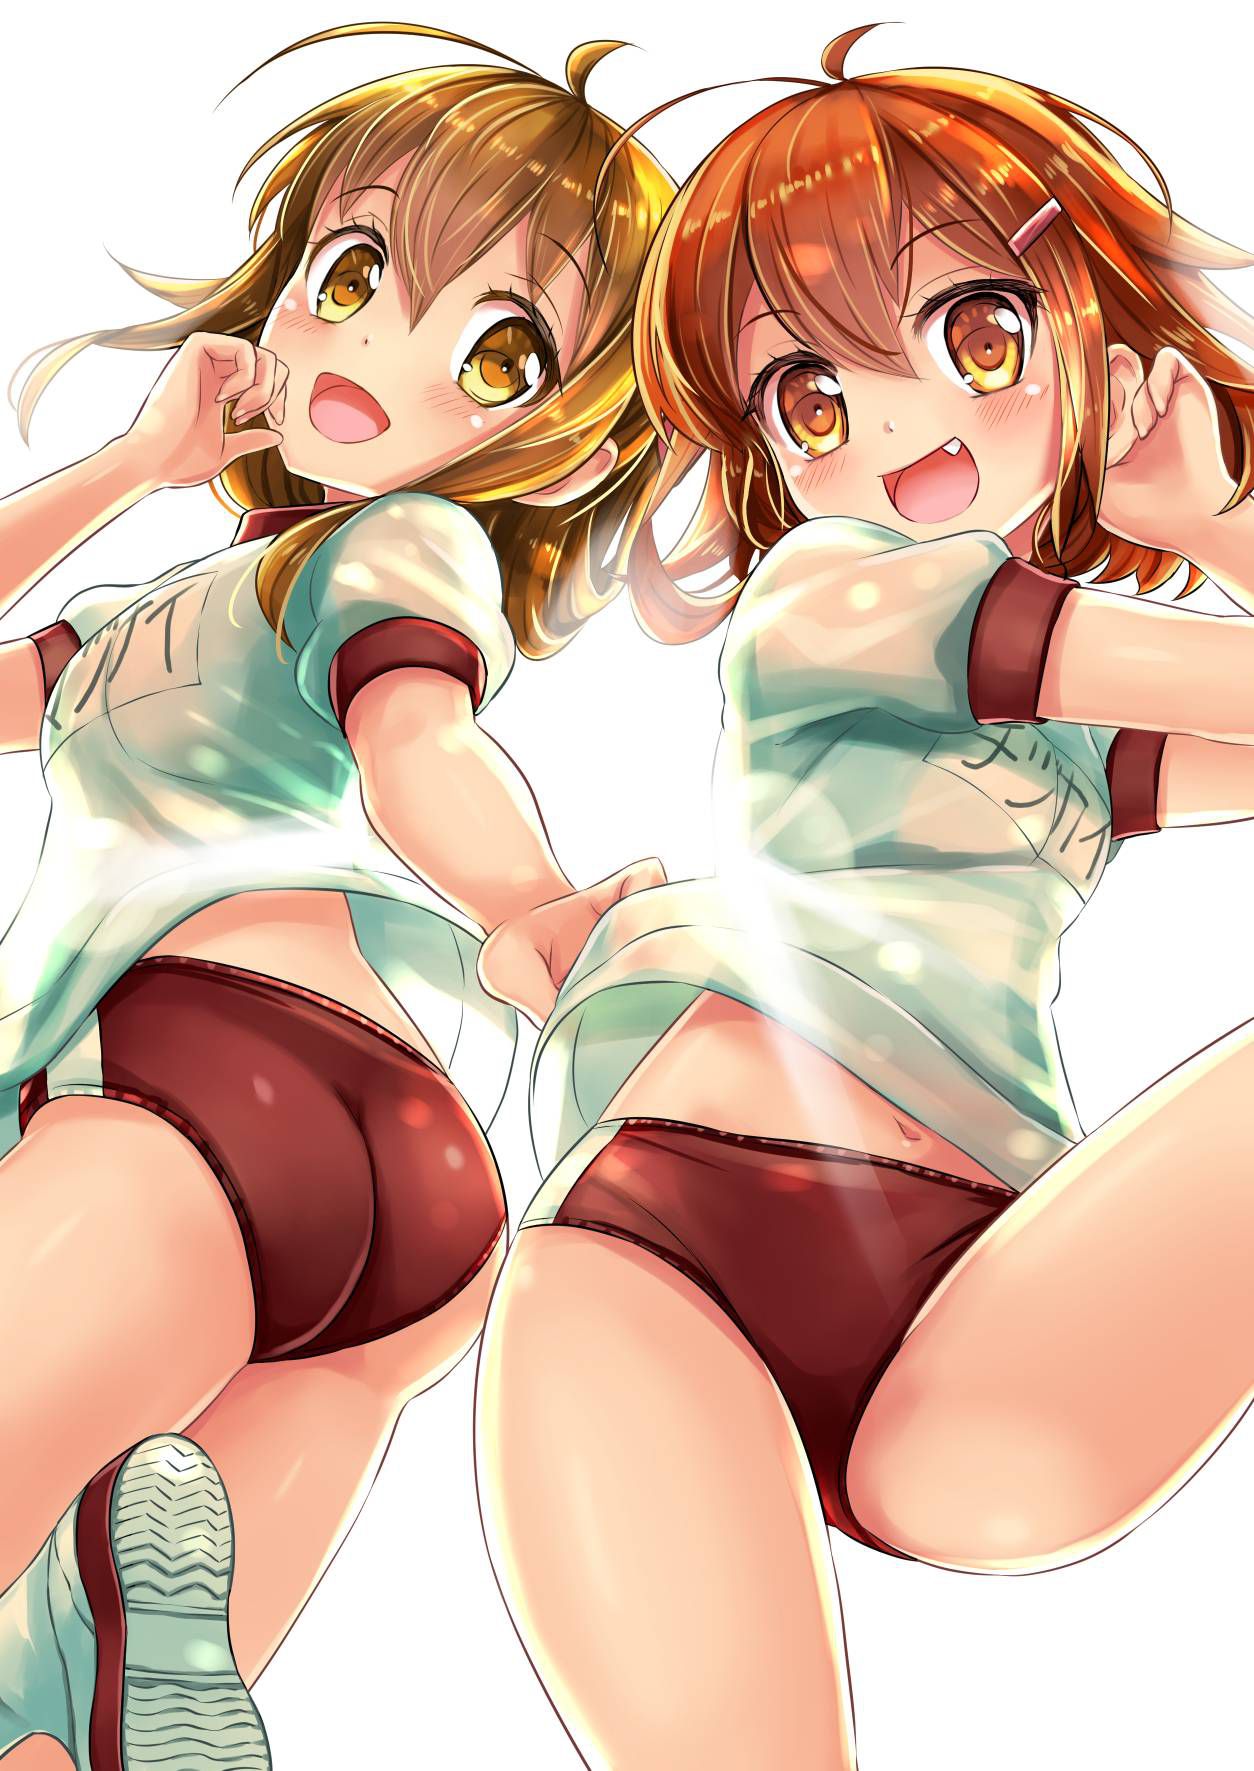 [some senses of incongruity] the second eroticism image which wear the top though is bloomers, a gym suit, and wear 22